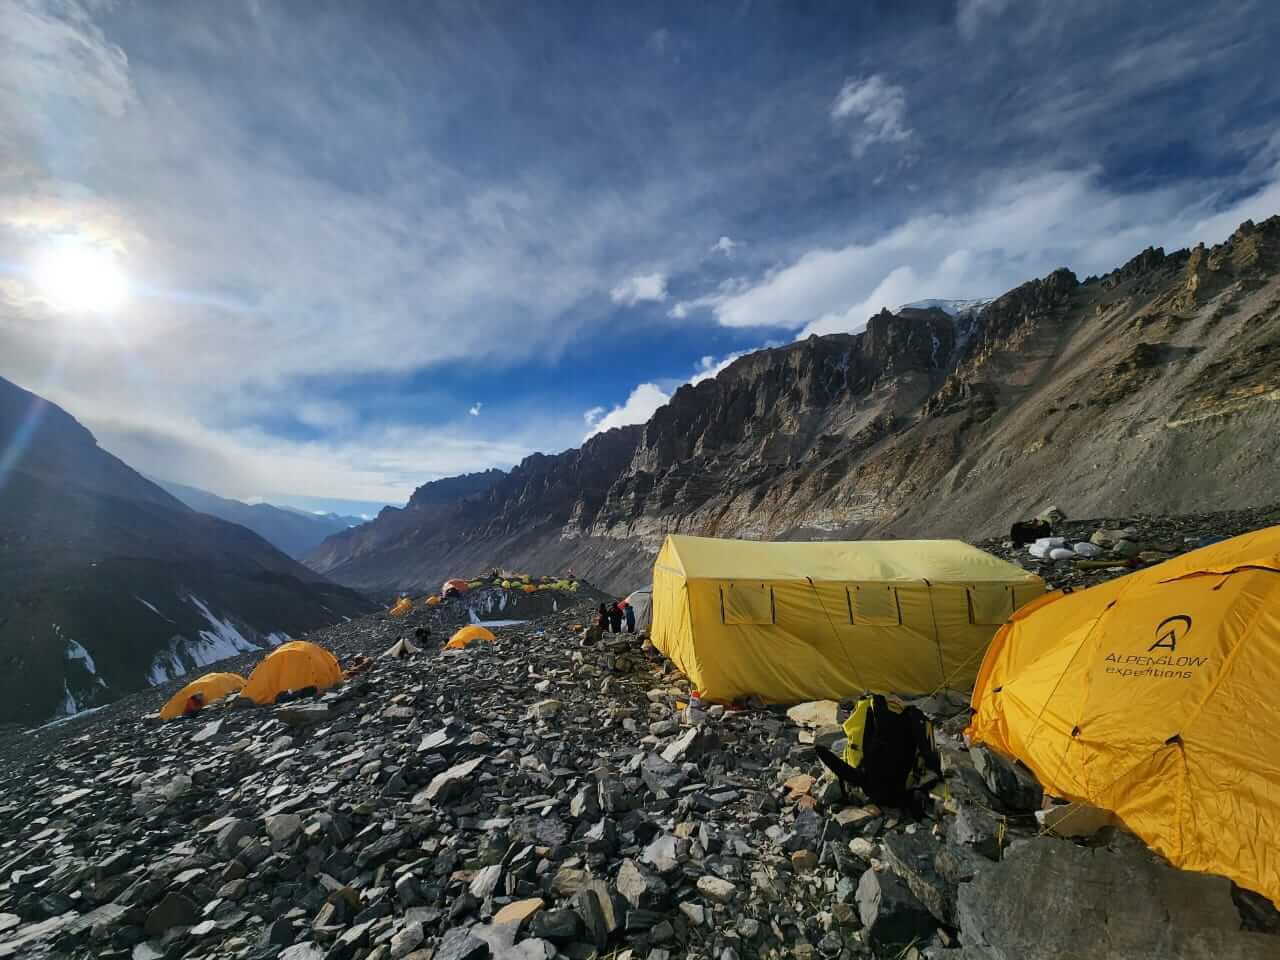 Mount Everest North Side Advanced Base Camp tents during an Alpenglow Expeditions ascent of Everest in 2024